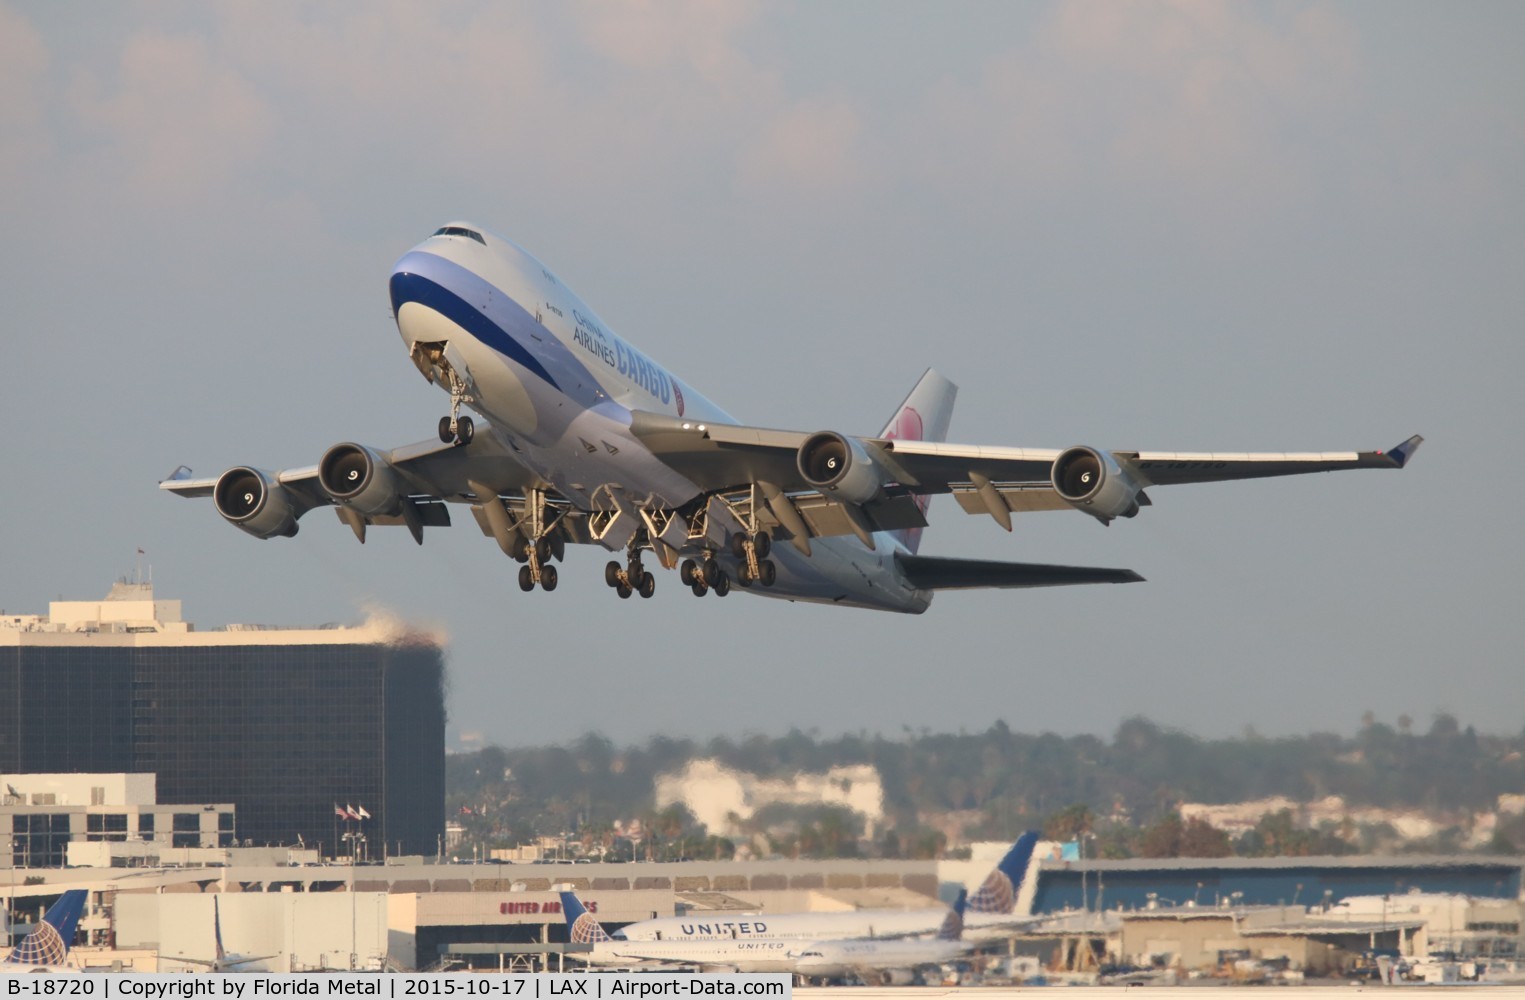 B-18720, 2005 Boeing 747-409F/SCD C/N 33733, China Airlines Cargo